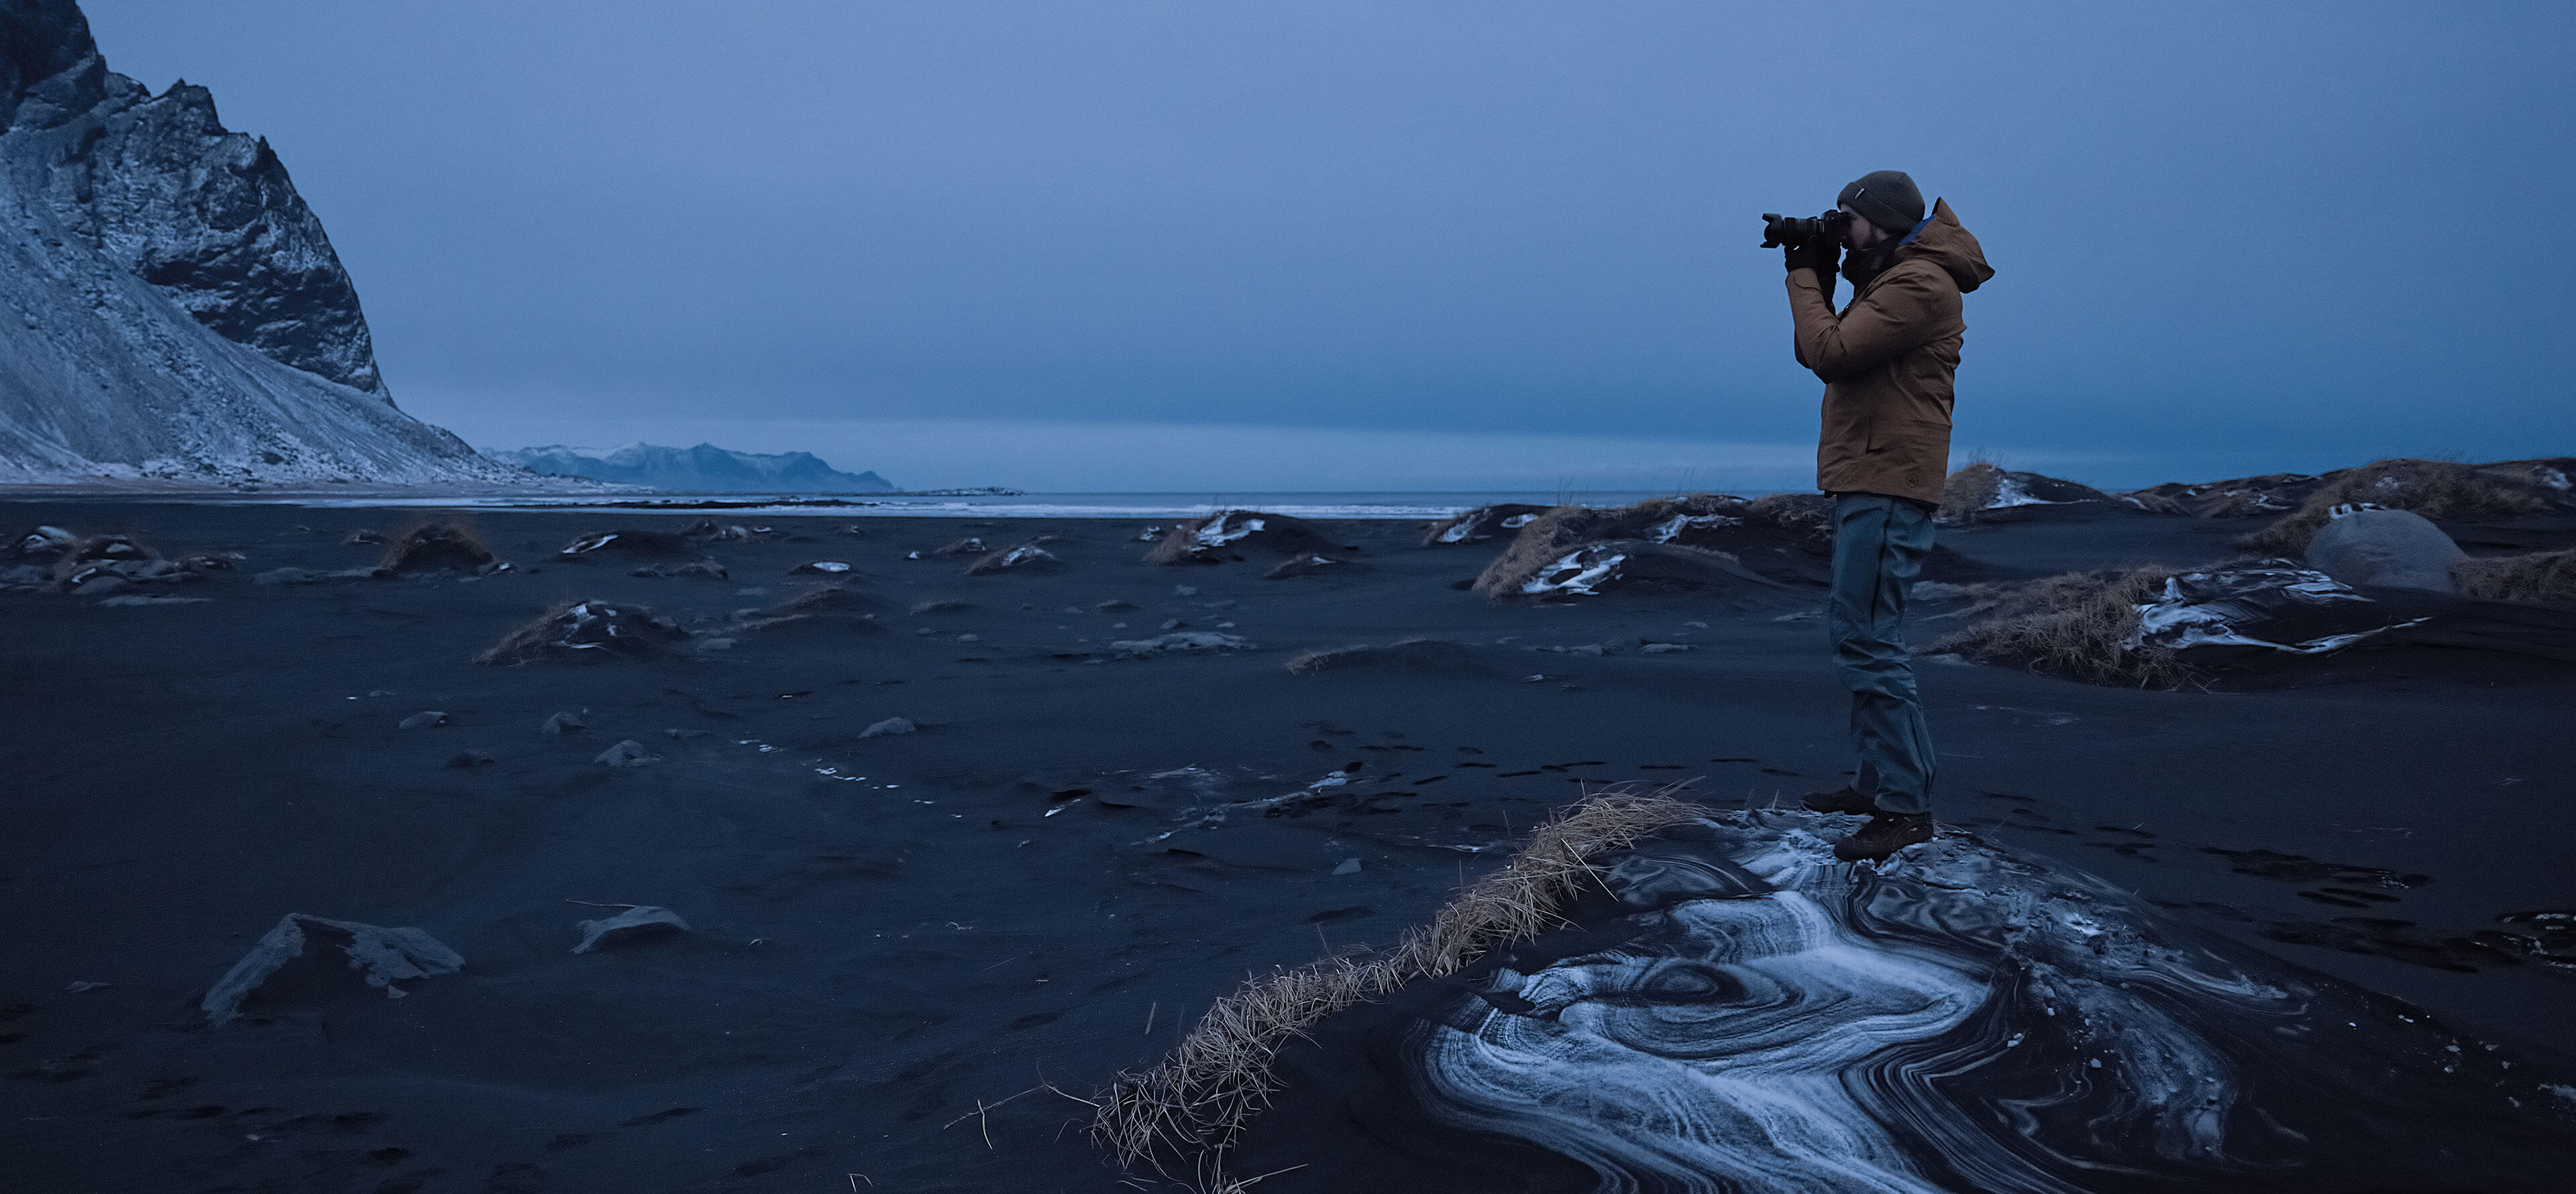 Ciril Jazbec with the Leica SL3 in a landscape